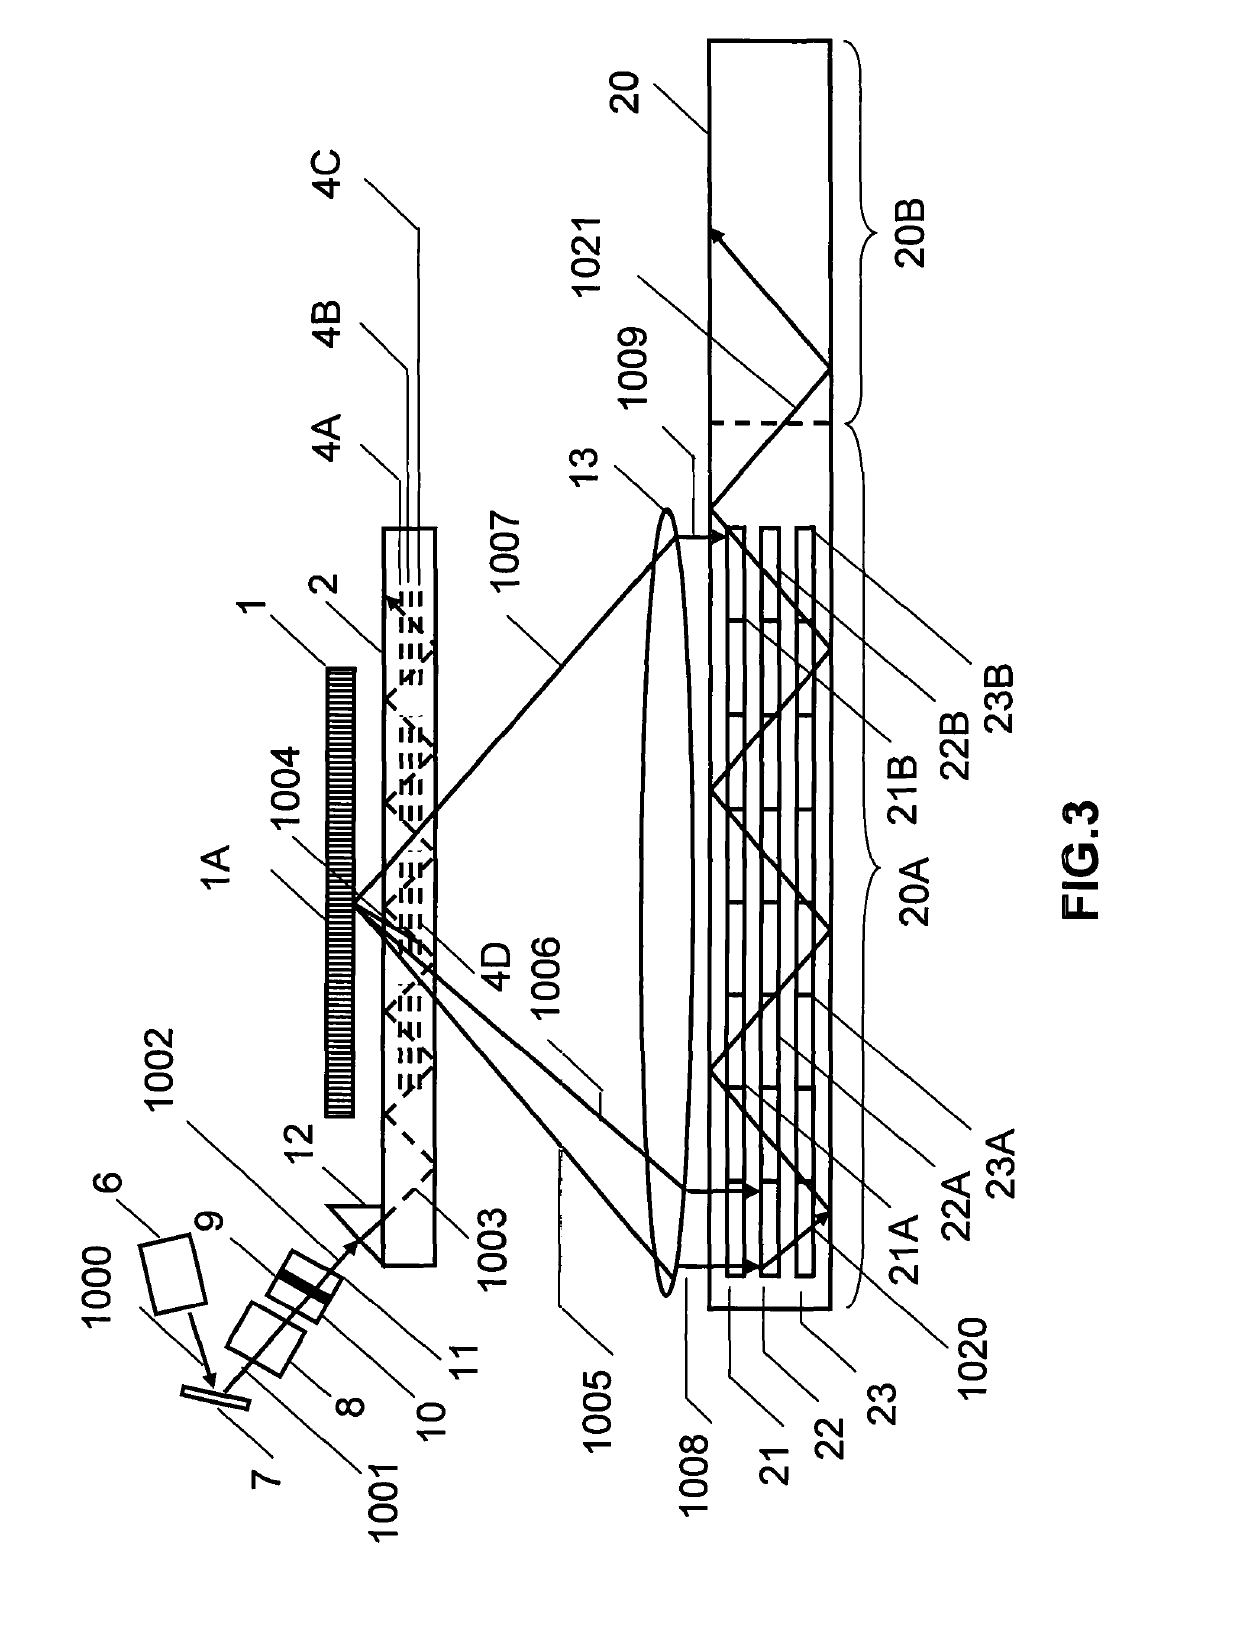 Method and apparatus for generating input images for holographic waveguide displays